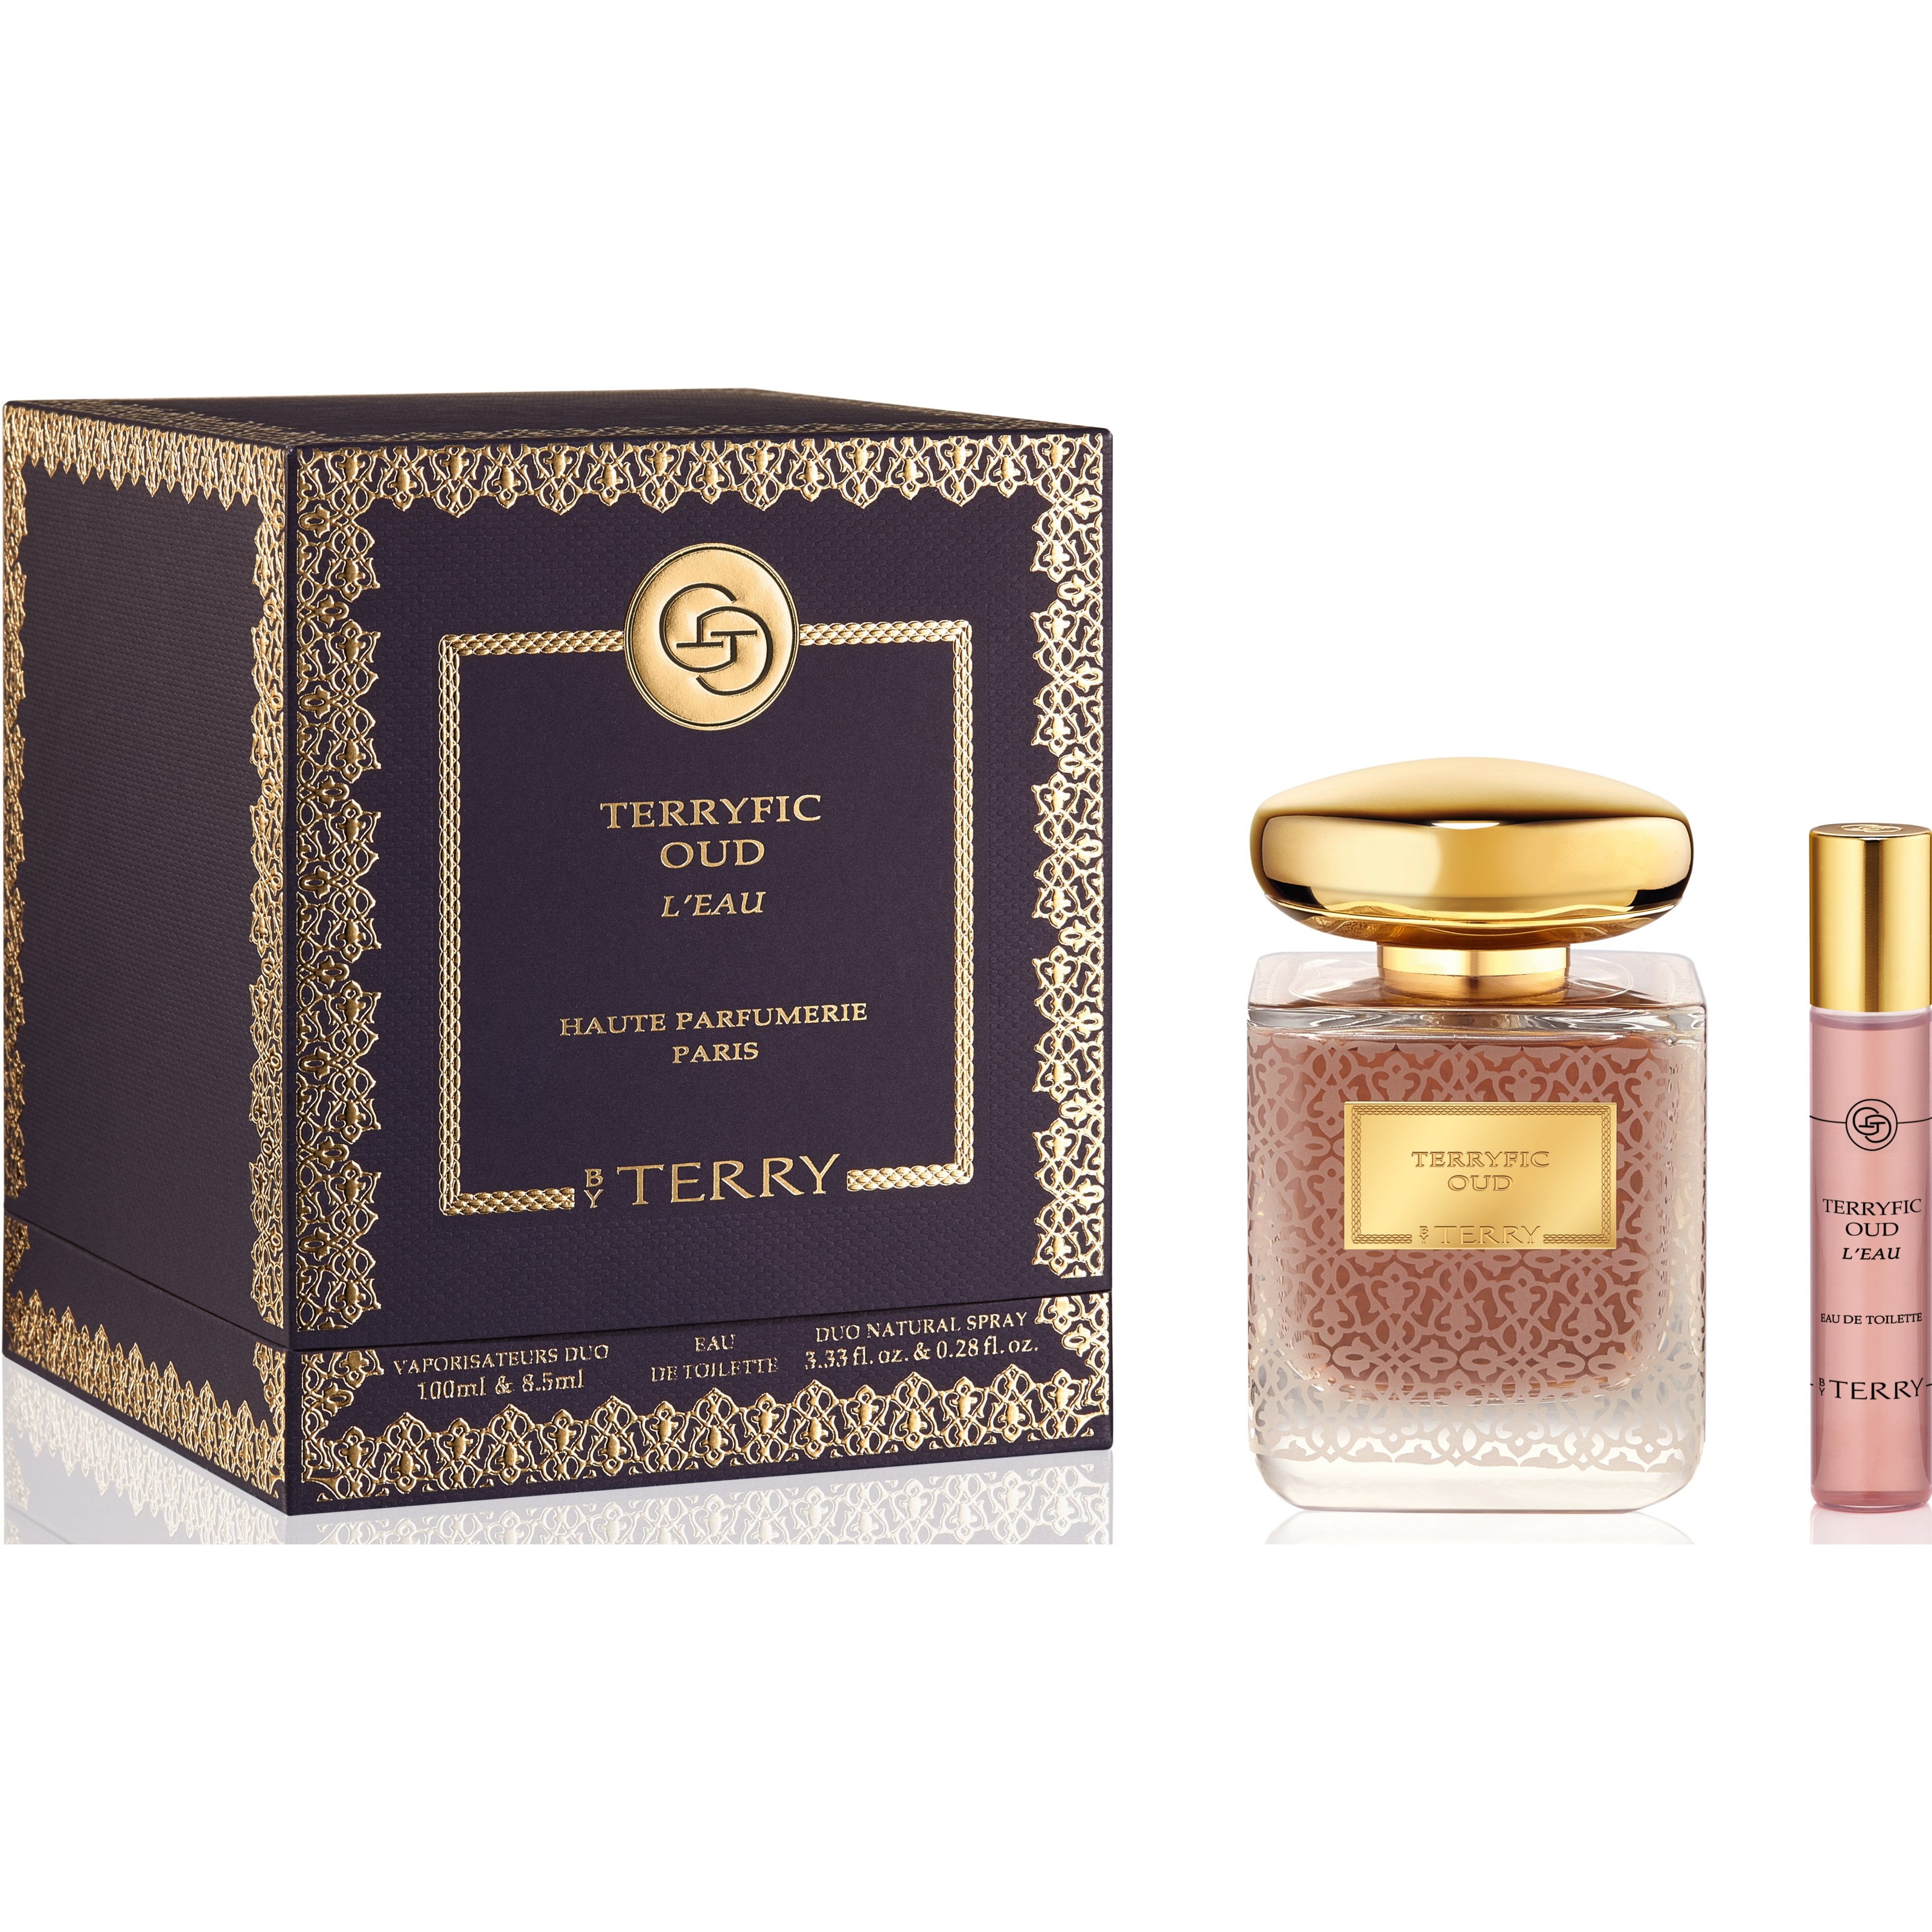 By Terry Perfume Collection Terryfic Oud L'Eau 108 ml